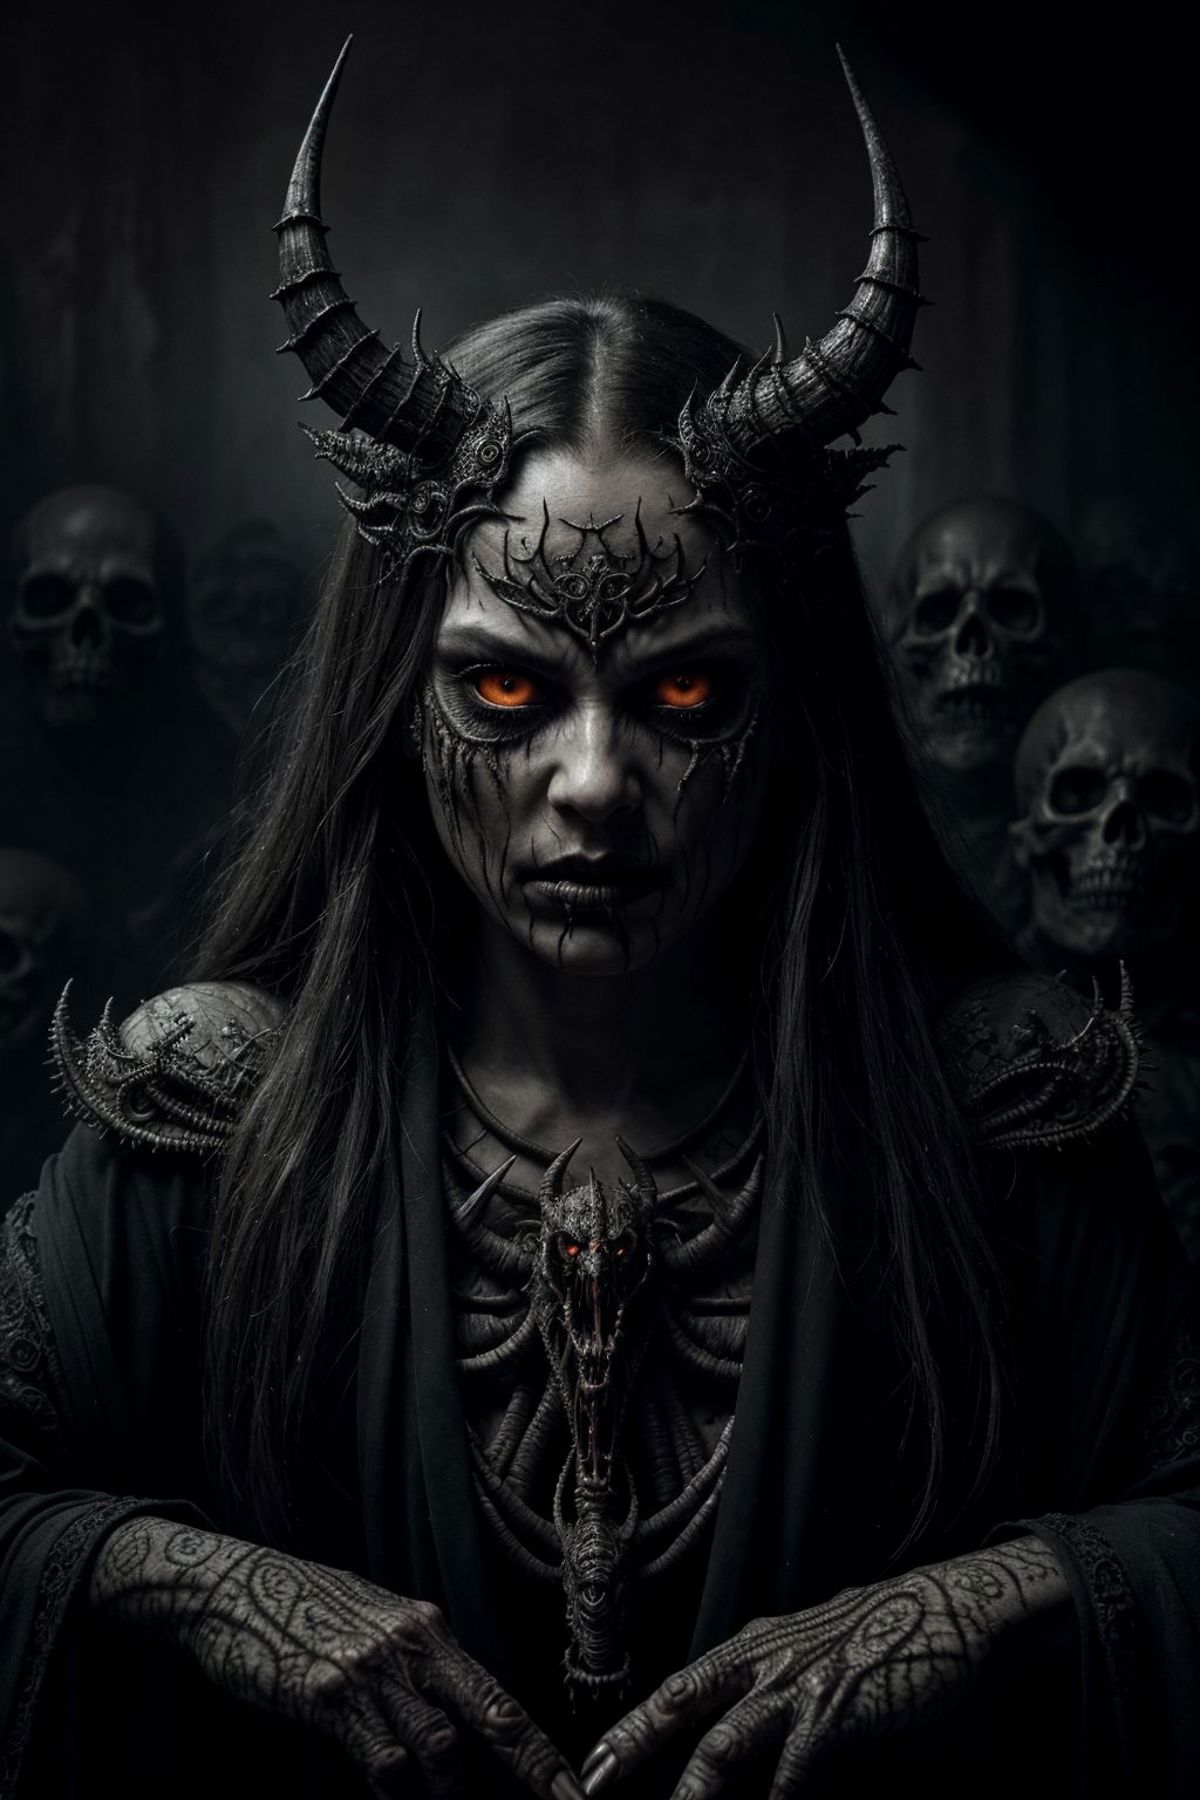 Woman with horns and red eyes in a dark setting with skeleton heads in the background.